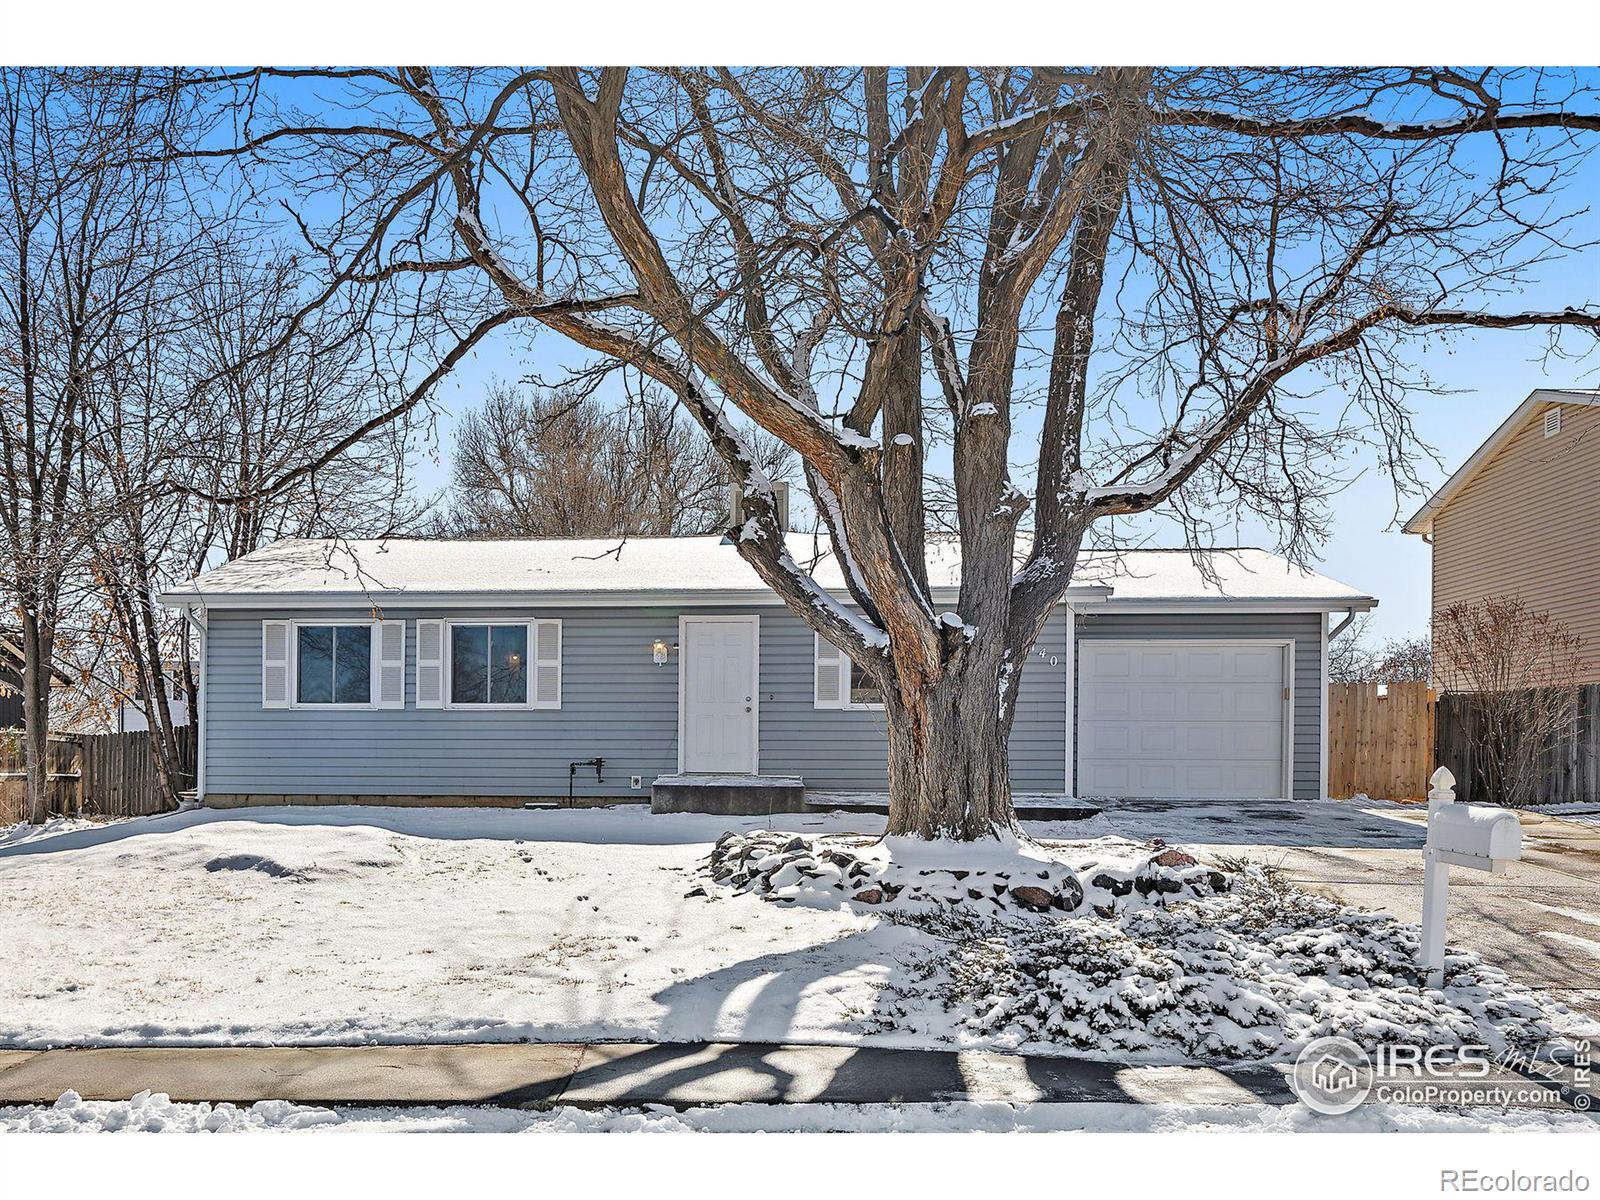 Report Image for 3140 W 133rd Circle,Broomfield, Colorado